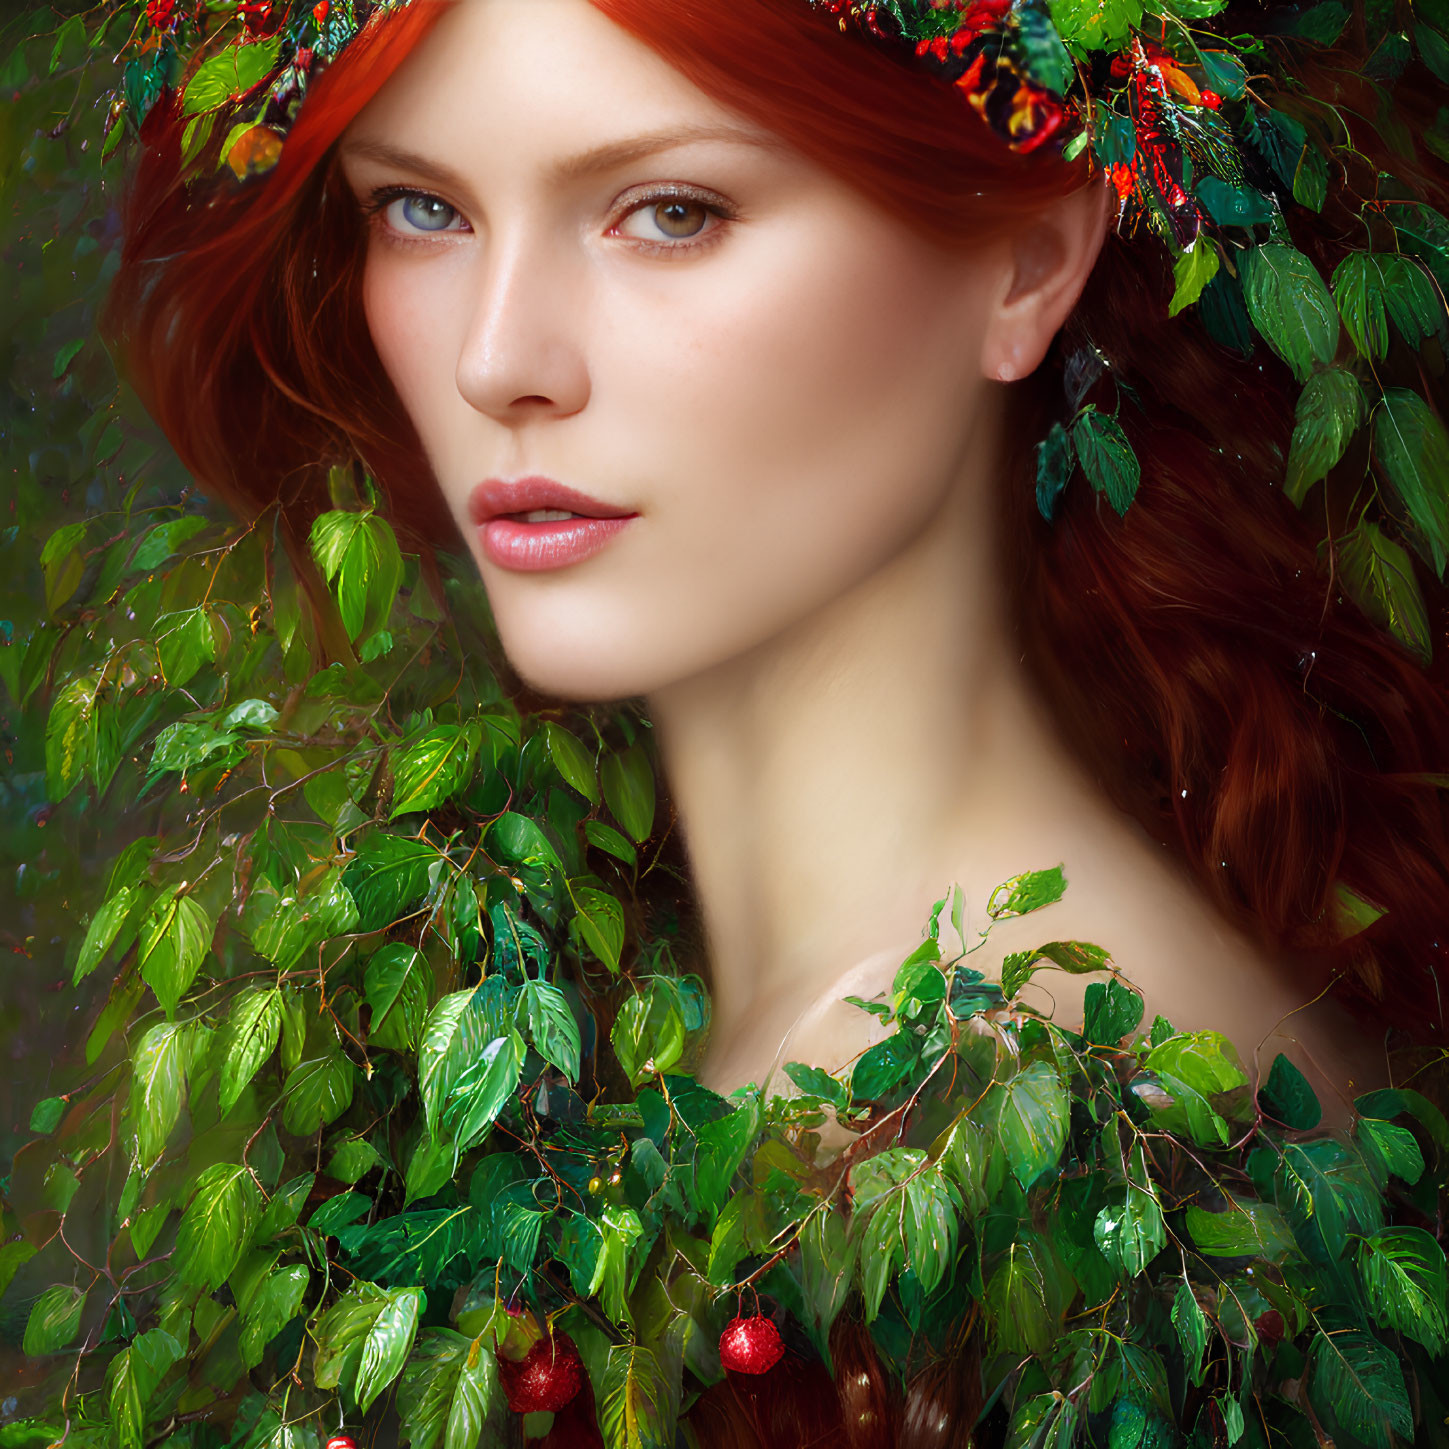 Red-haired woman with green leaves and berries in her hair.